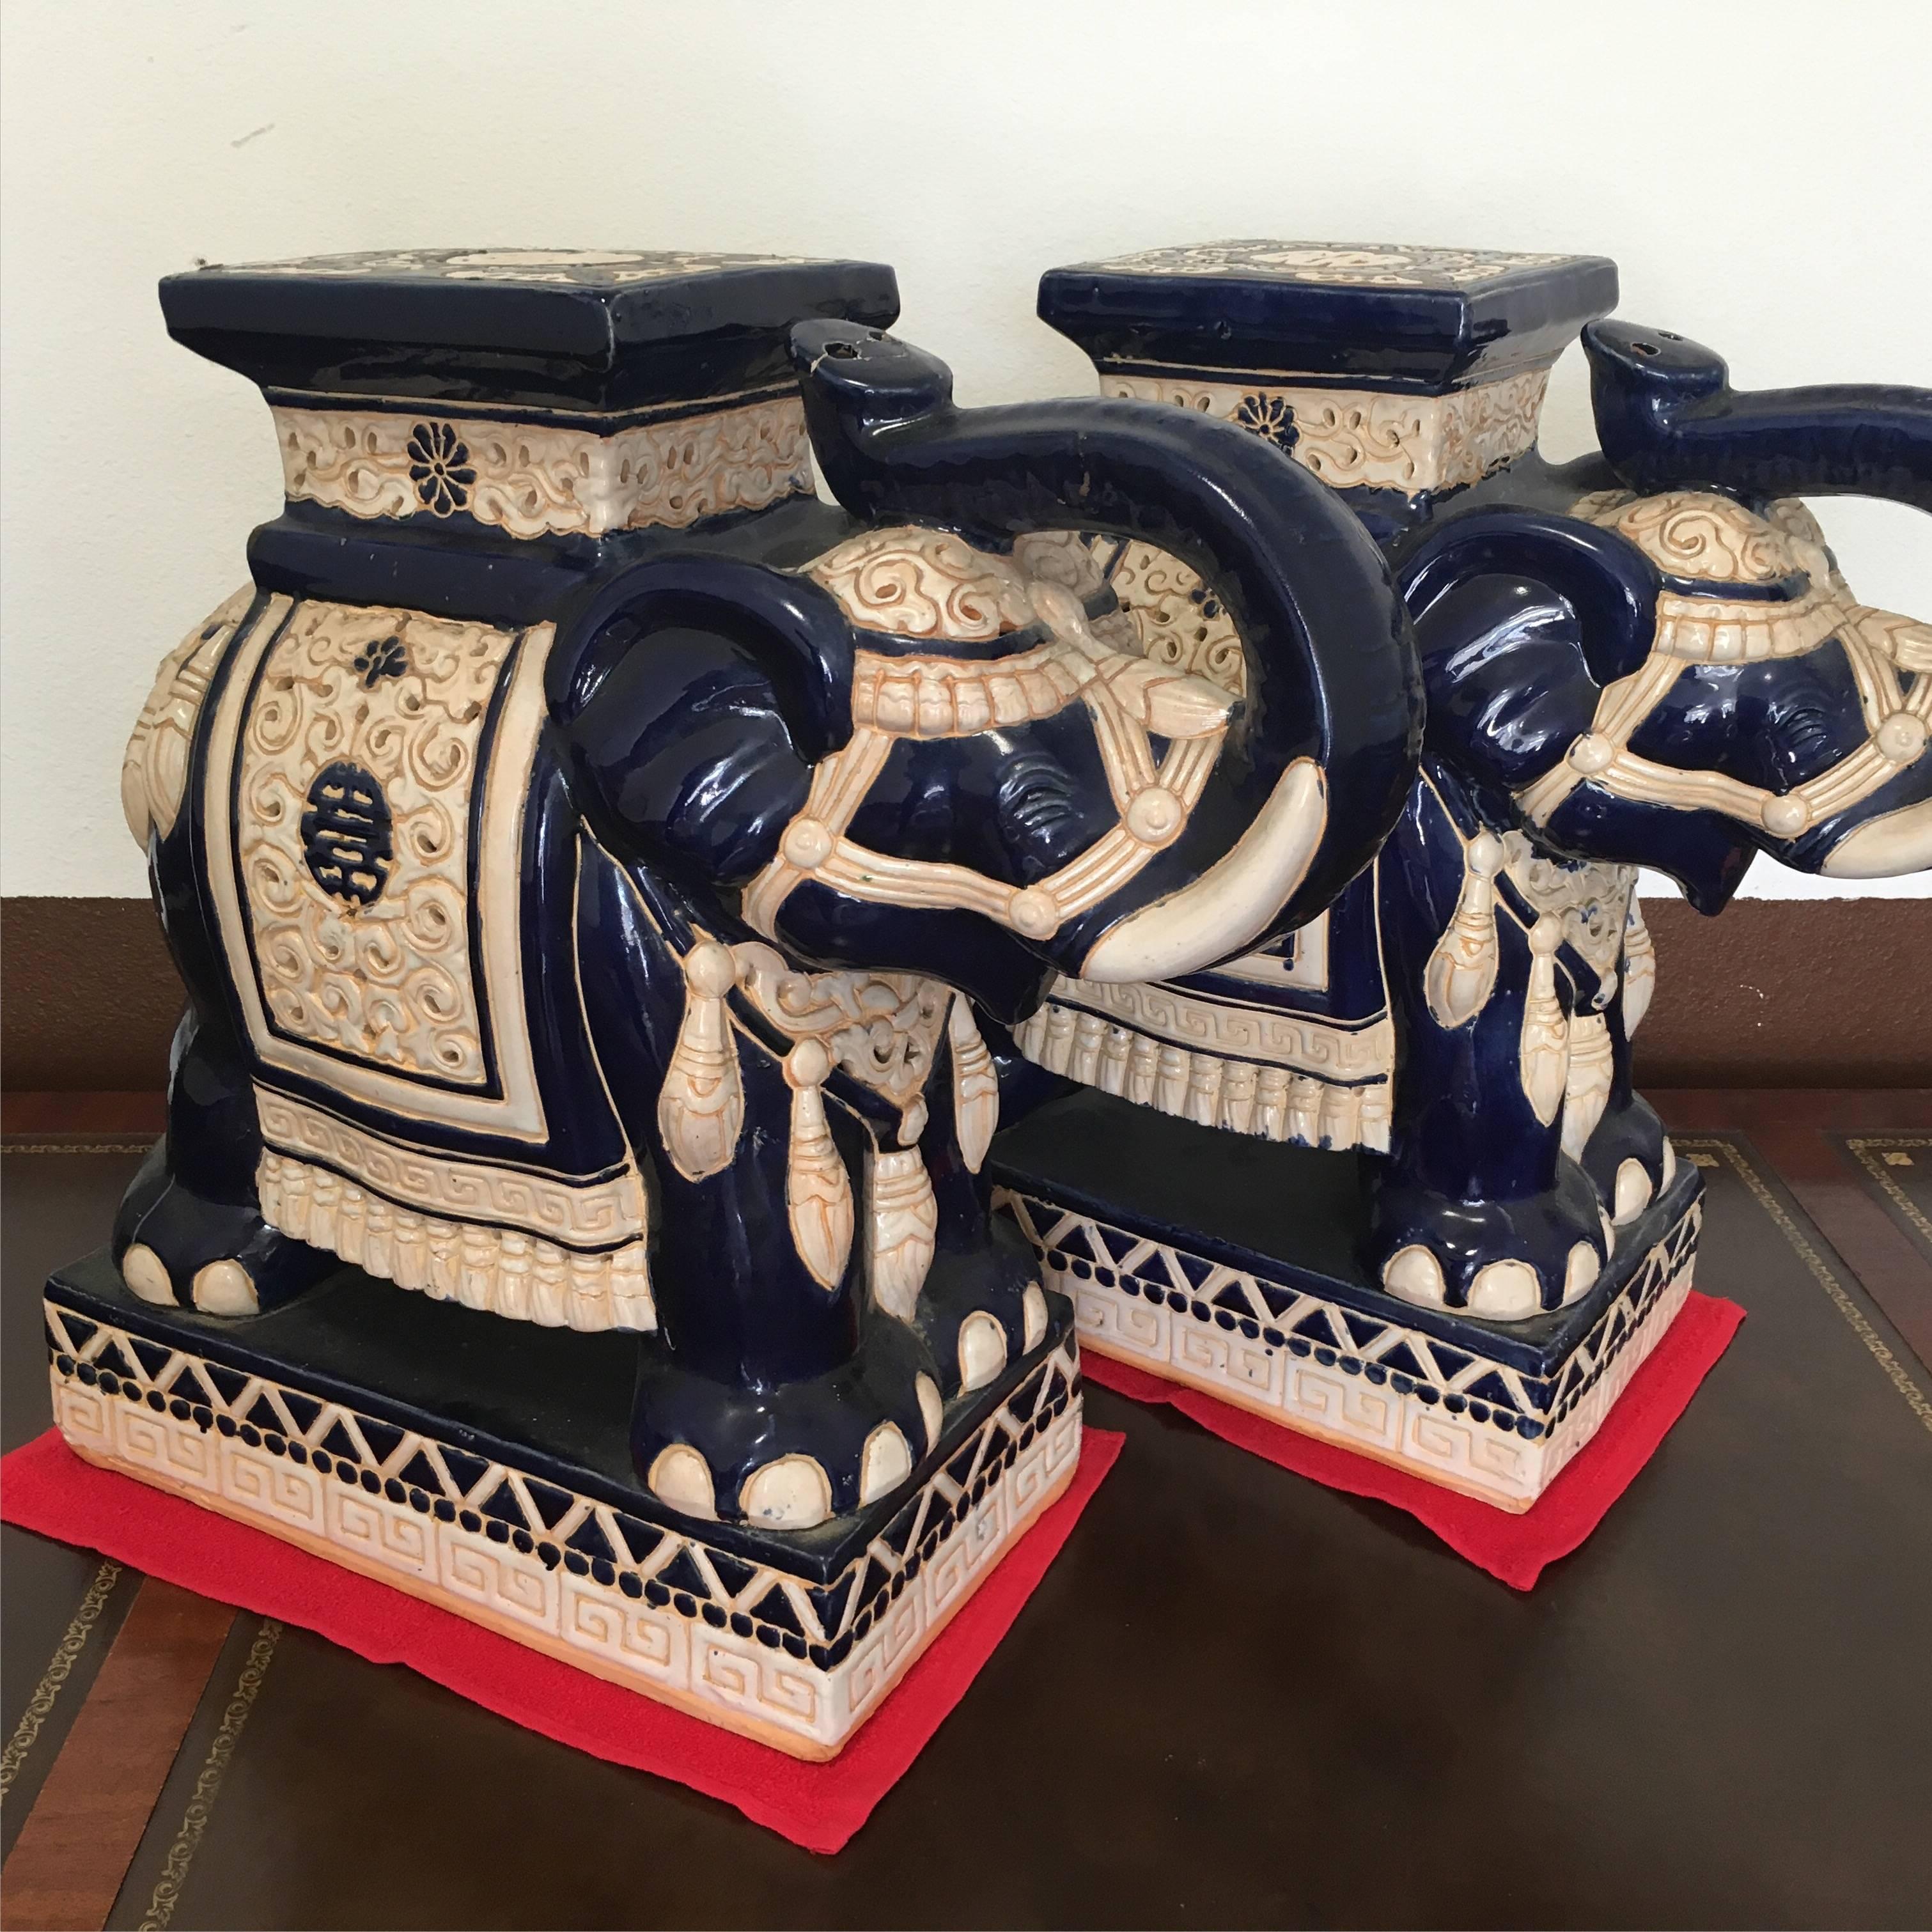 Pair of elephants, trunks up for good luck... great for the garden as stools or side tables. These elephants are in a nice blue - see our other pair in brown!